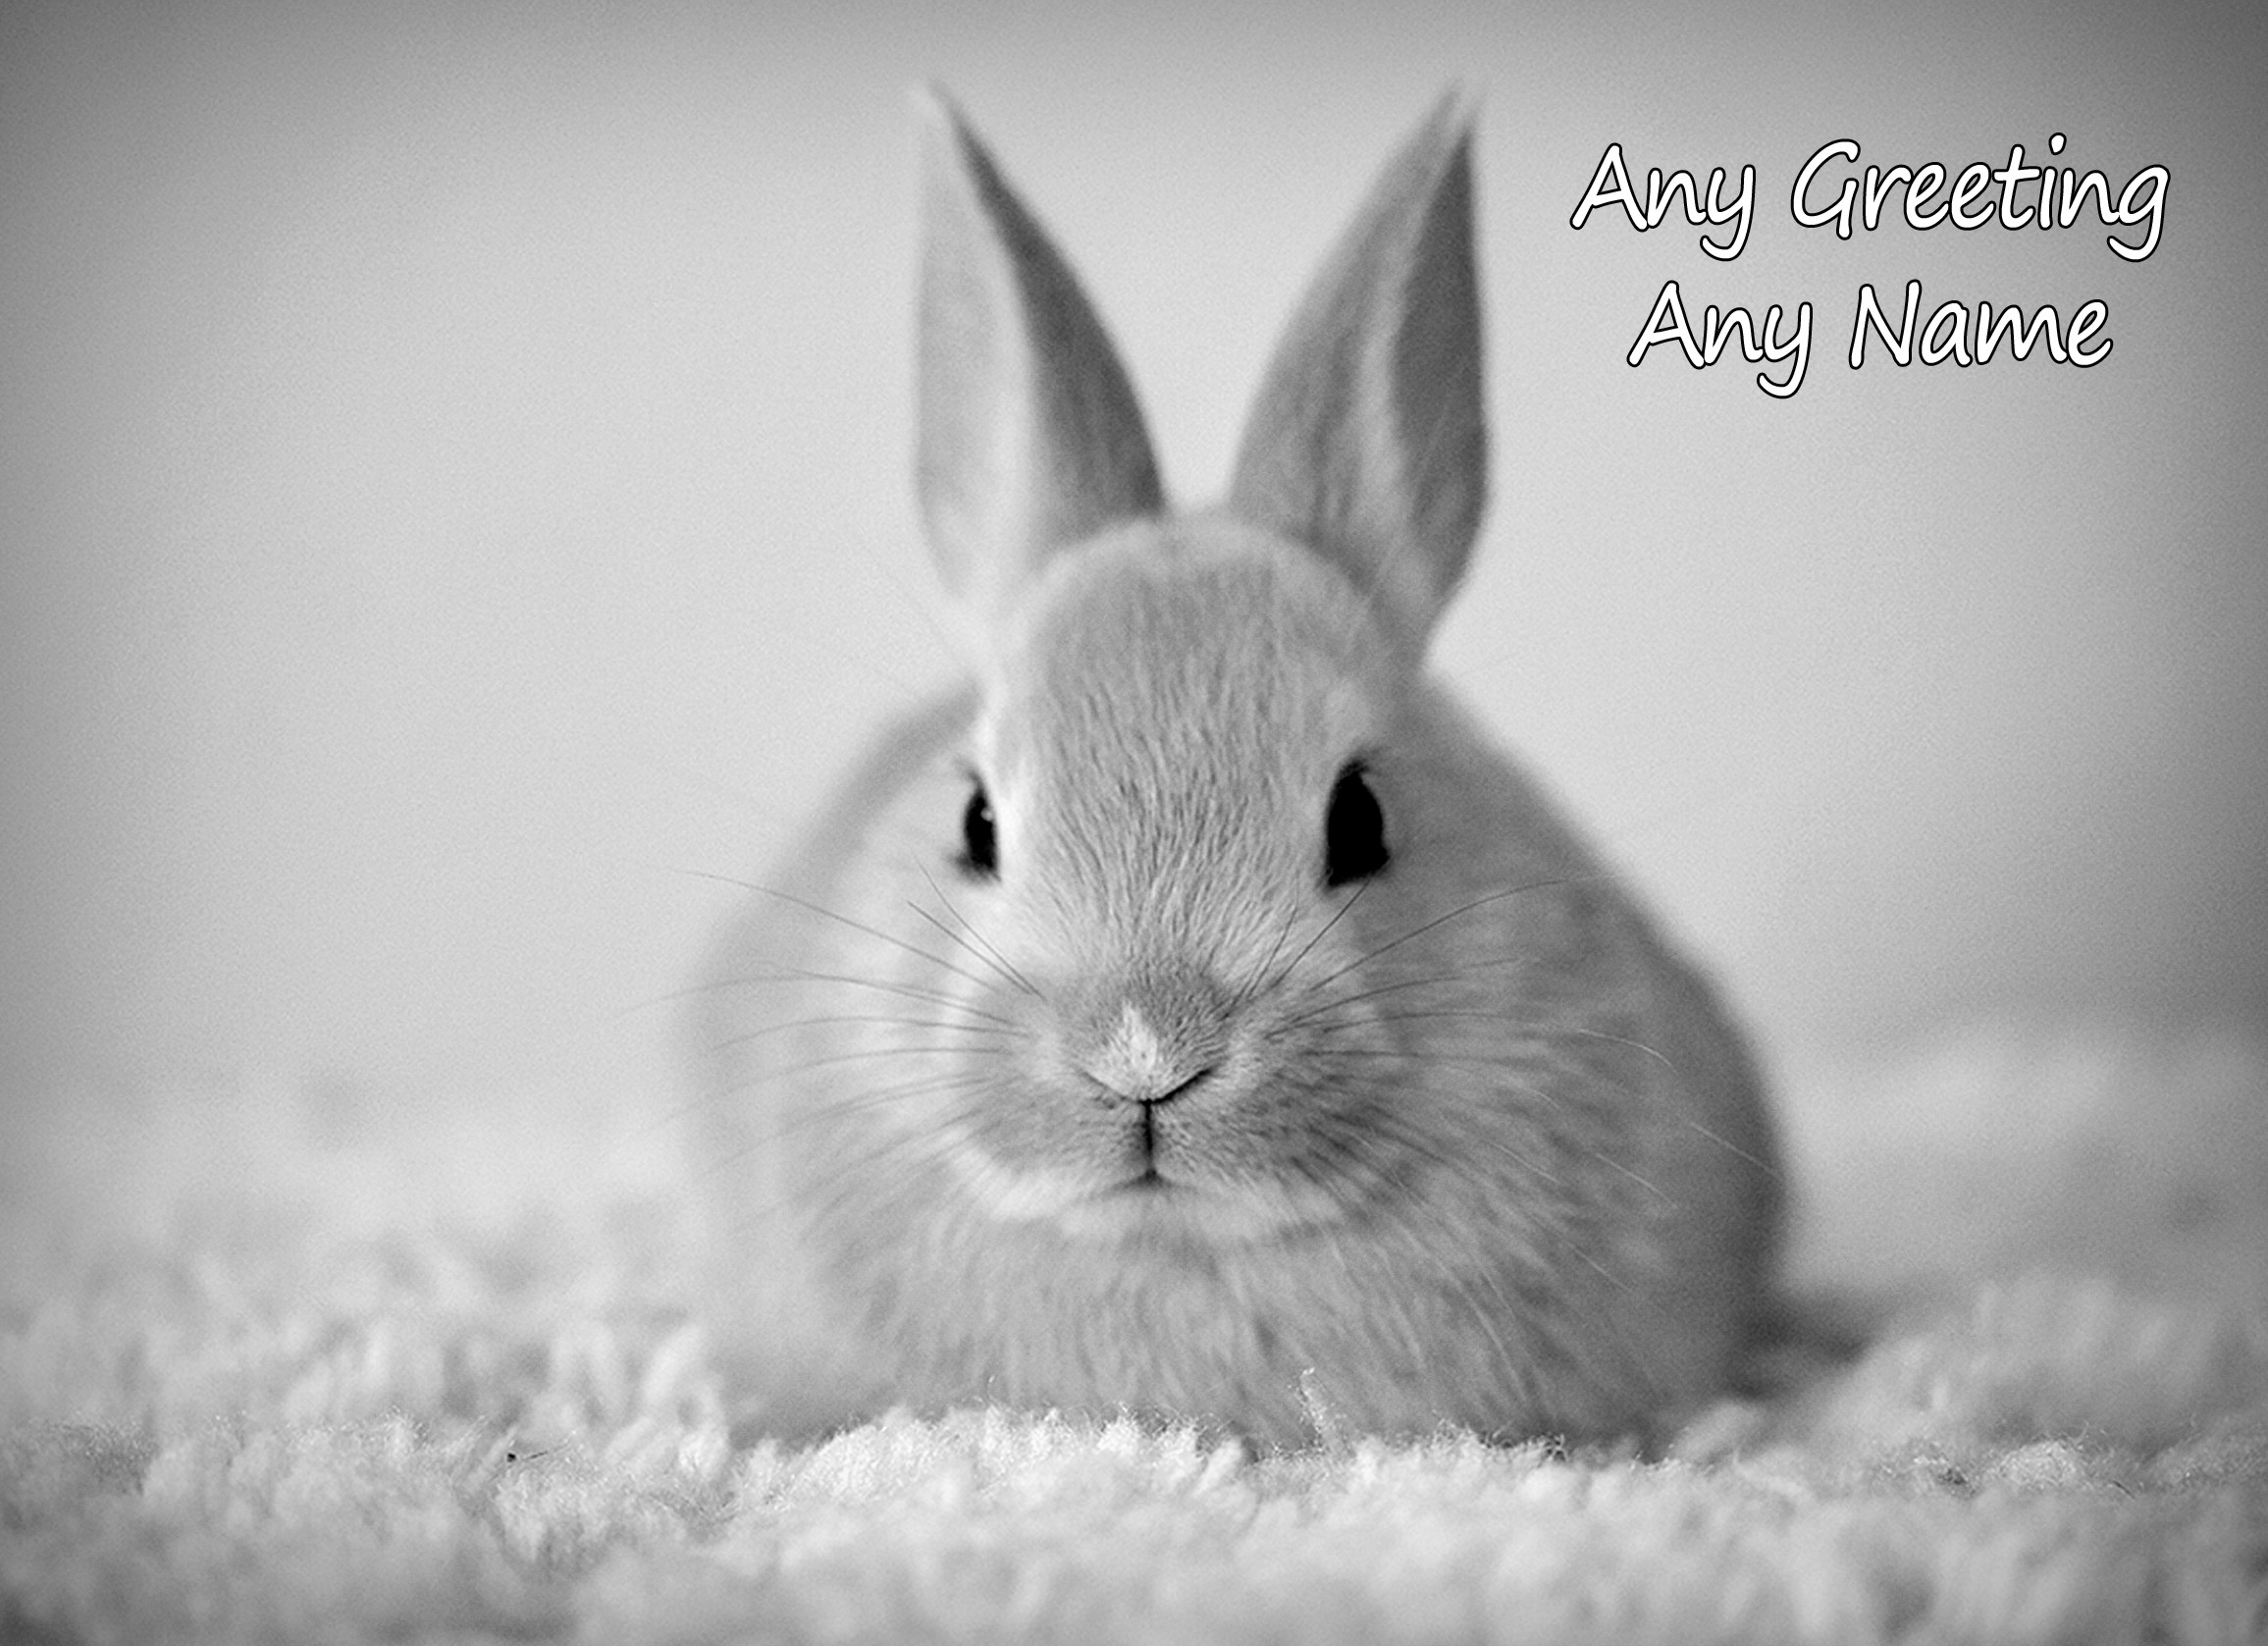 Personalised Rabbit Black and White Art Greeting Card (Birthday, Christmas, Any Occasion)